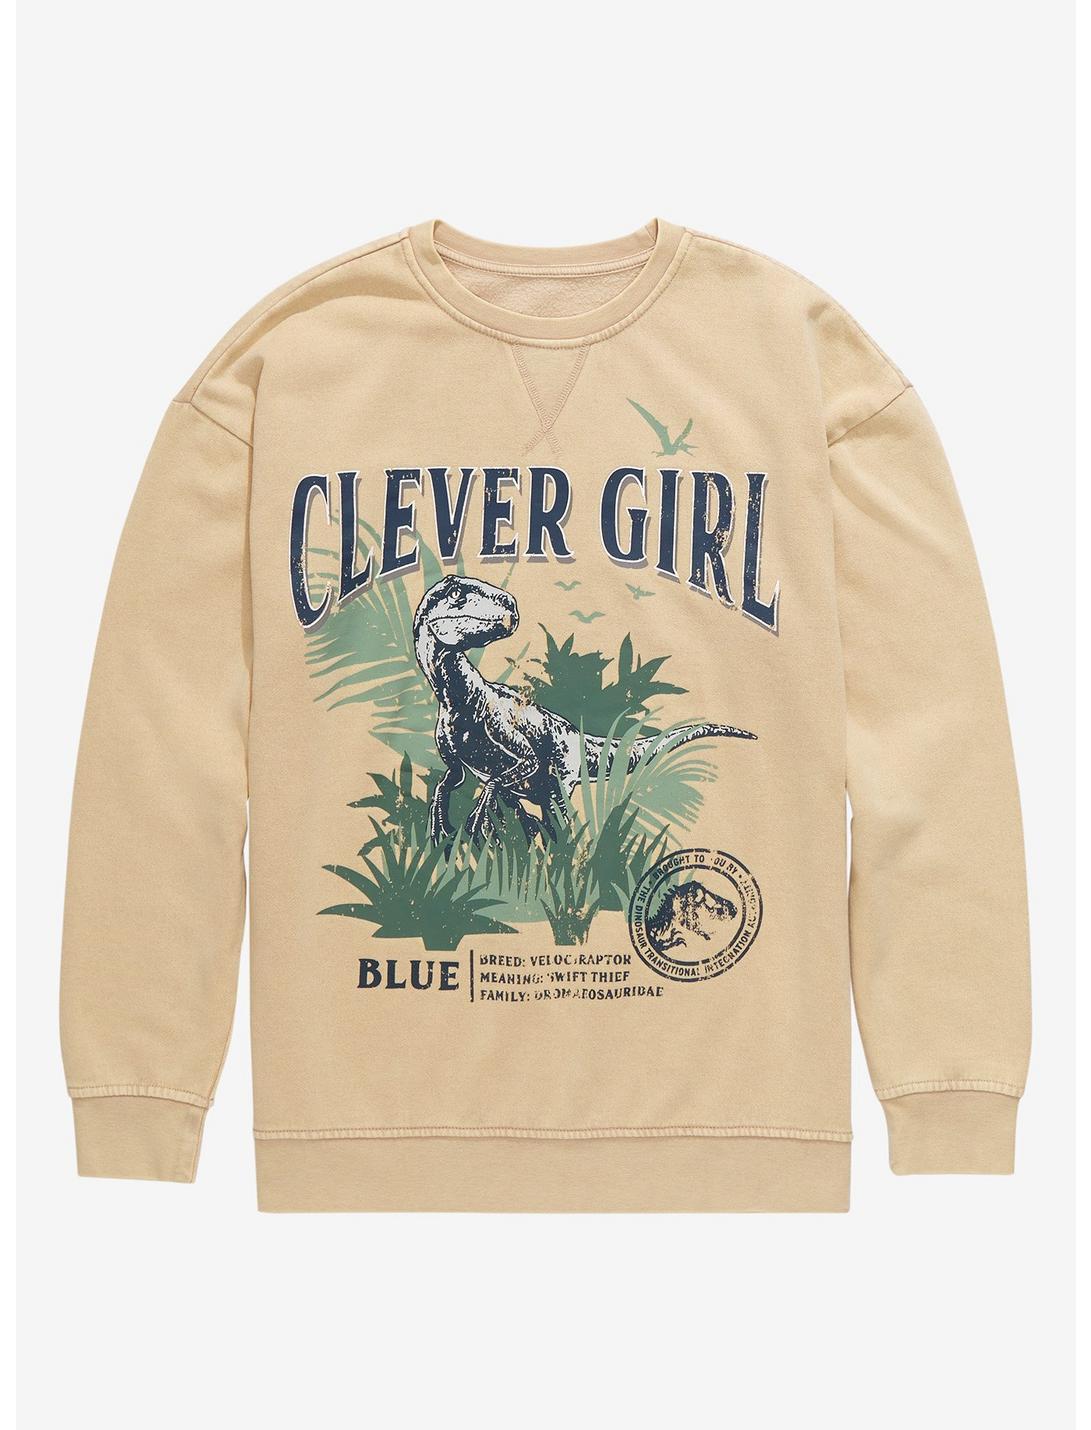 Jurassic World Clever Girl Crewneck - BoxLunch Exclusive | BoxLunch